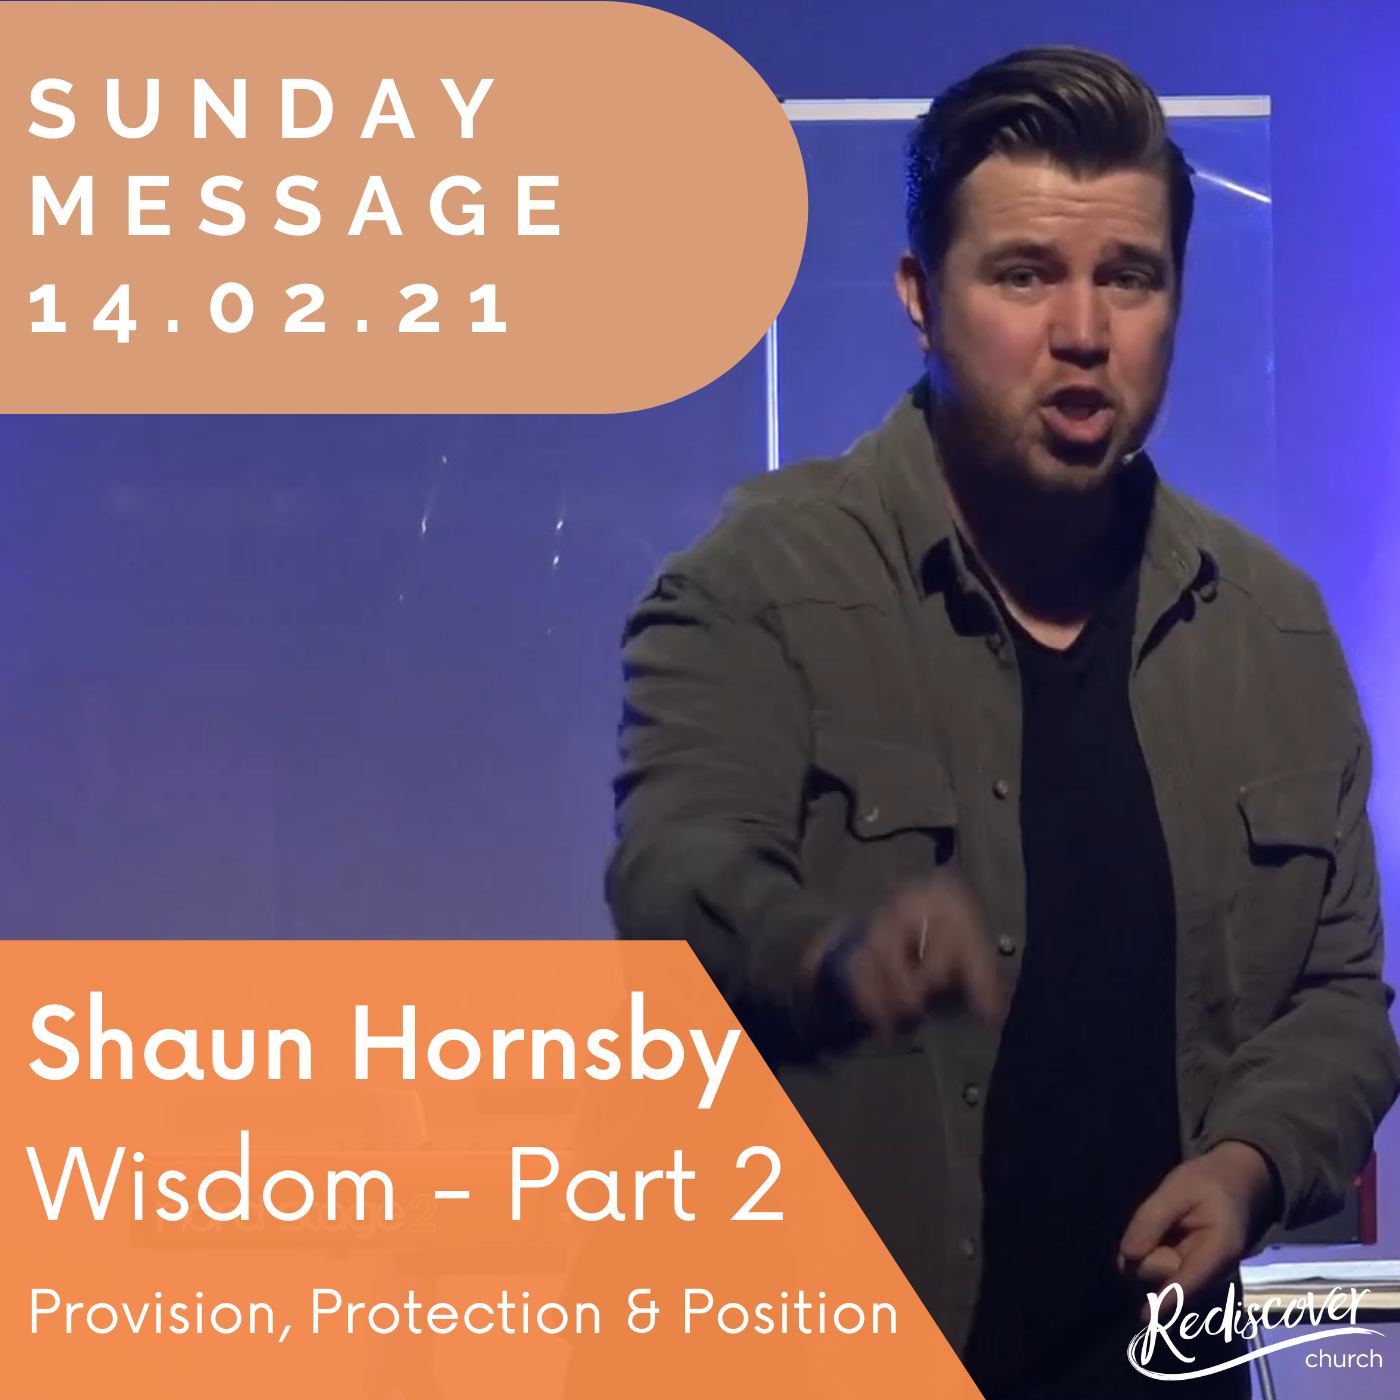 Shaun Hornsby - Sunday Message | Wisdom - Part 2 | Fear of the Lord